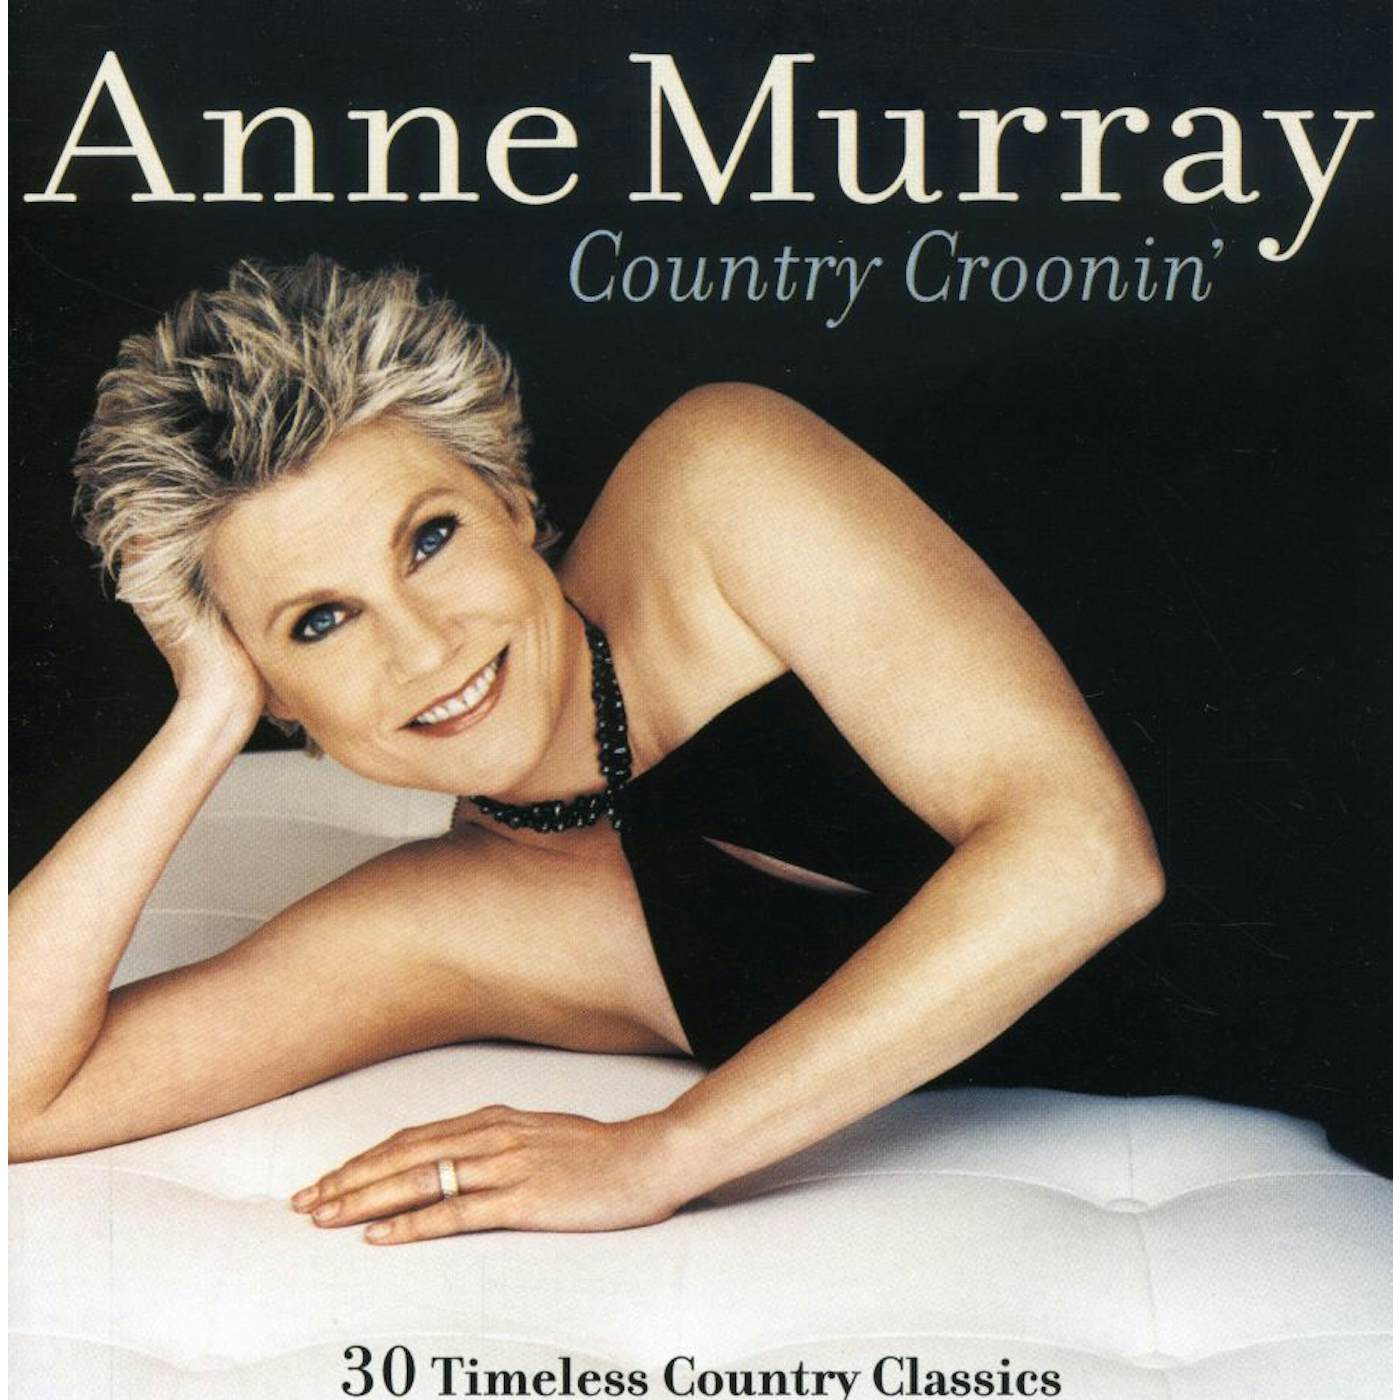 Anne Murray COUNTRY CROONIN CD